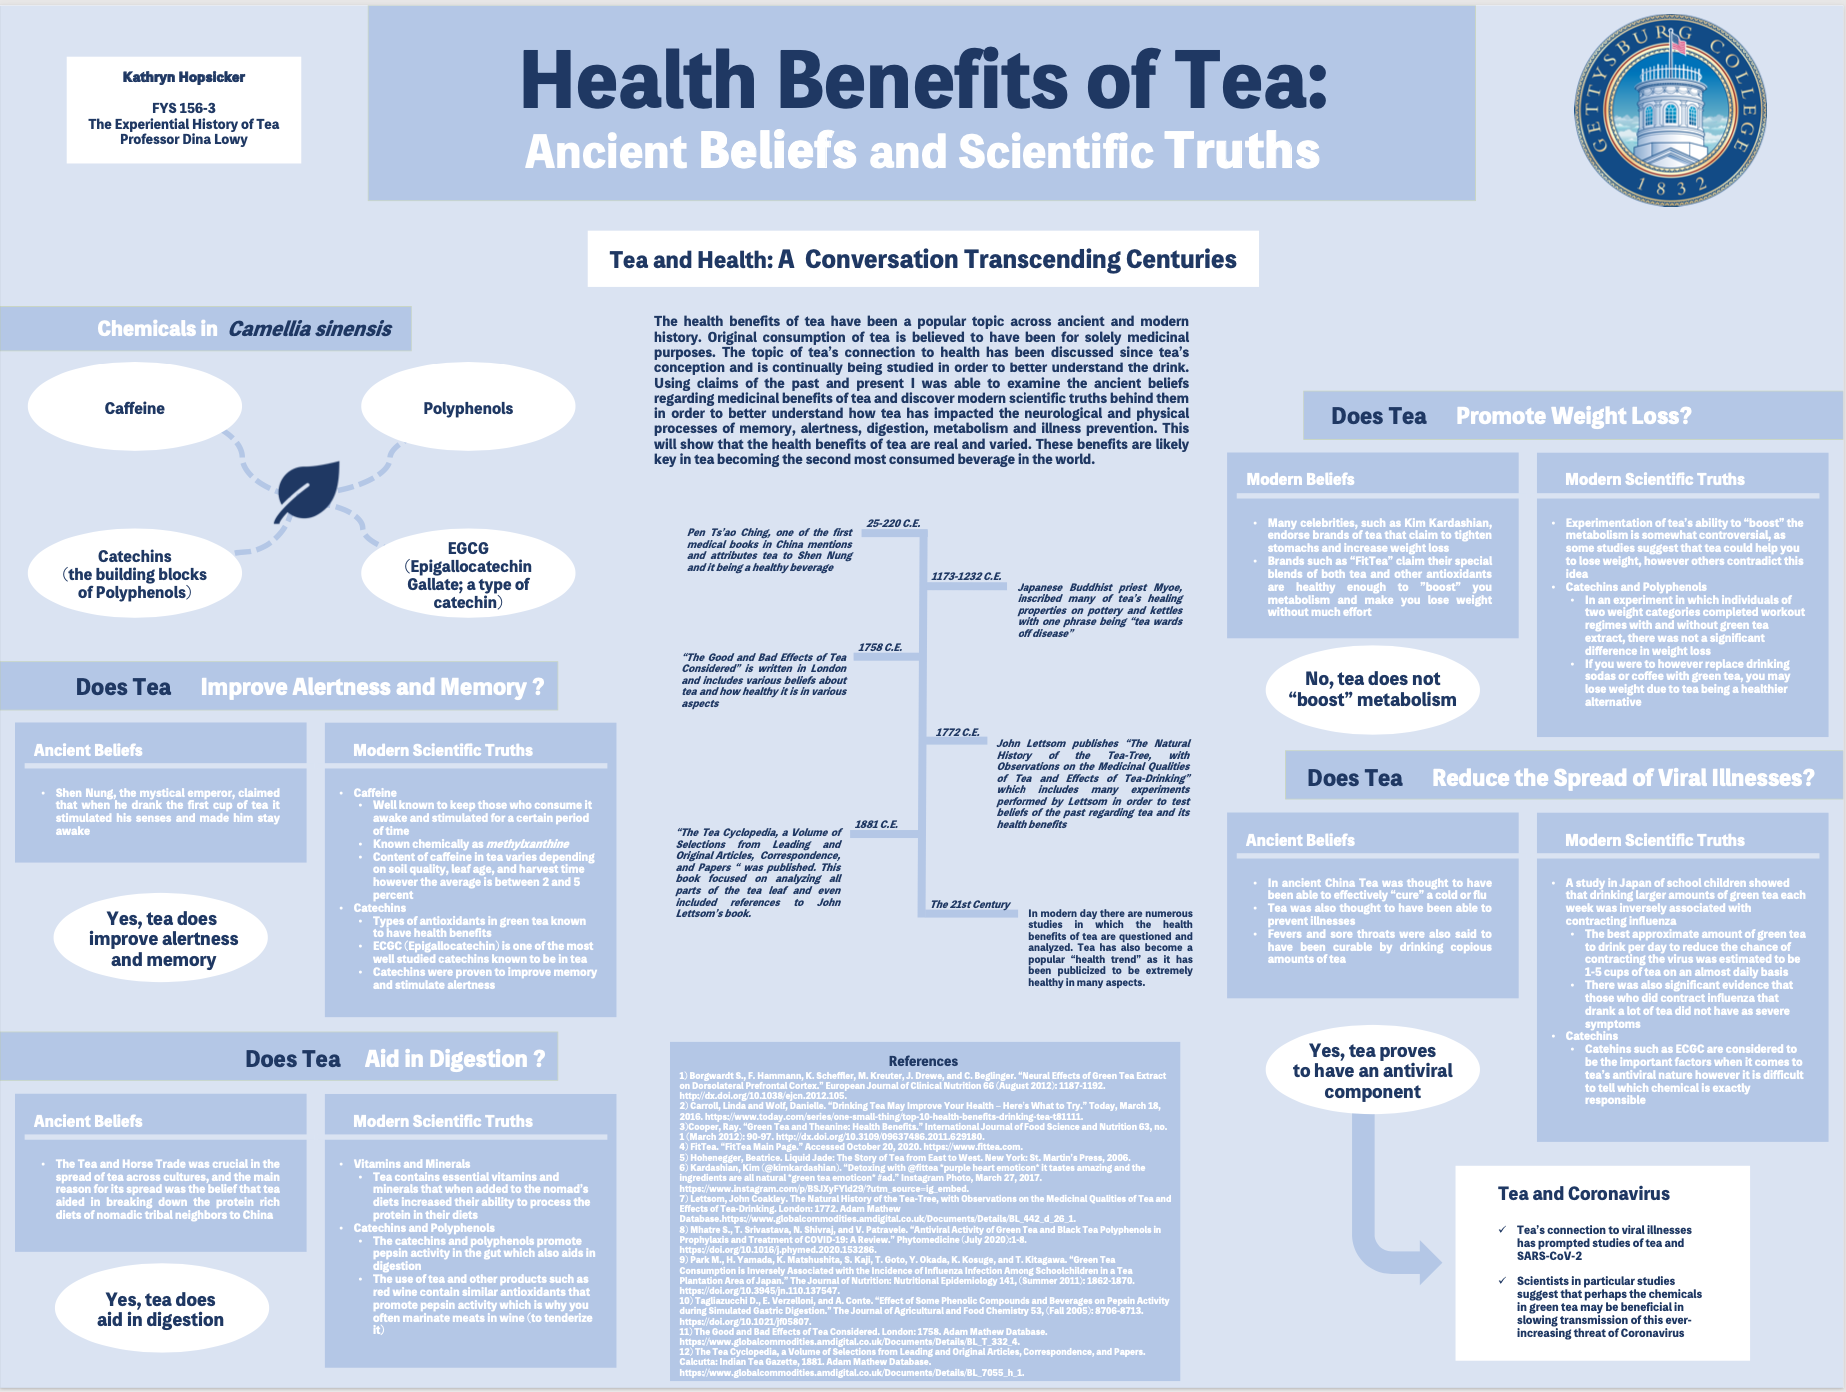 Showcase Image for The Health Benefits of Tea: Ancient Beliefs and Scientific Truths